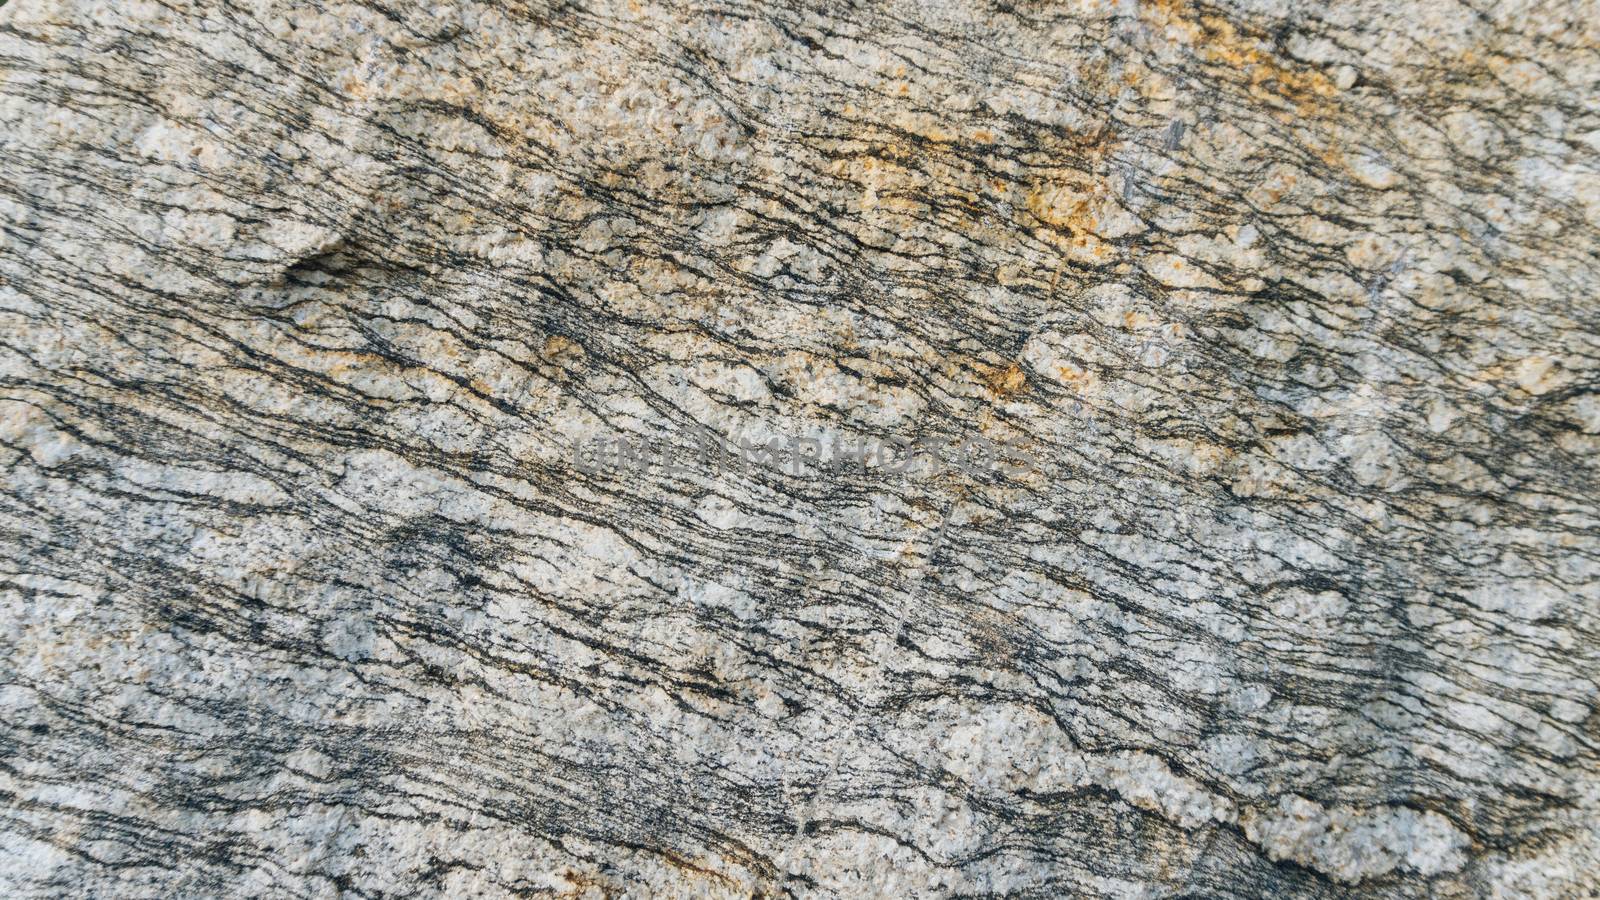 Gneiss Layered Texture. The layers and texture of this natural, Granite Gneiss make an edgy, yet earthy background for any project.